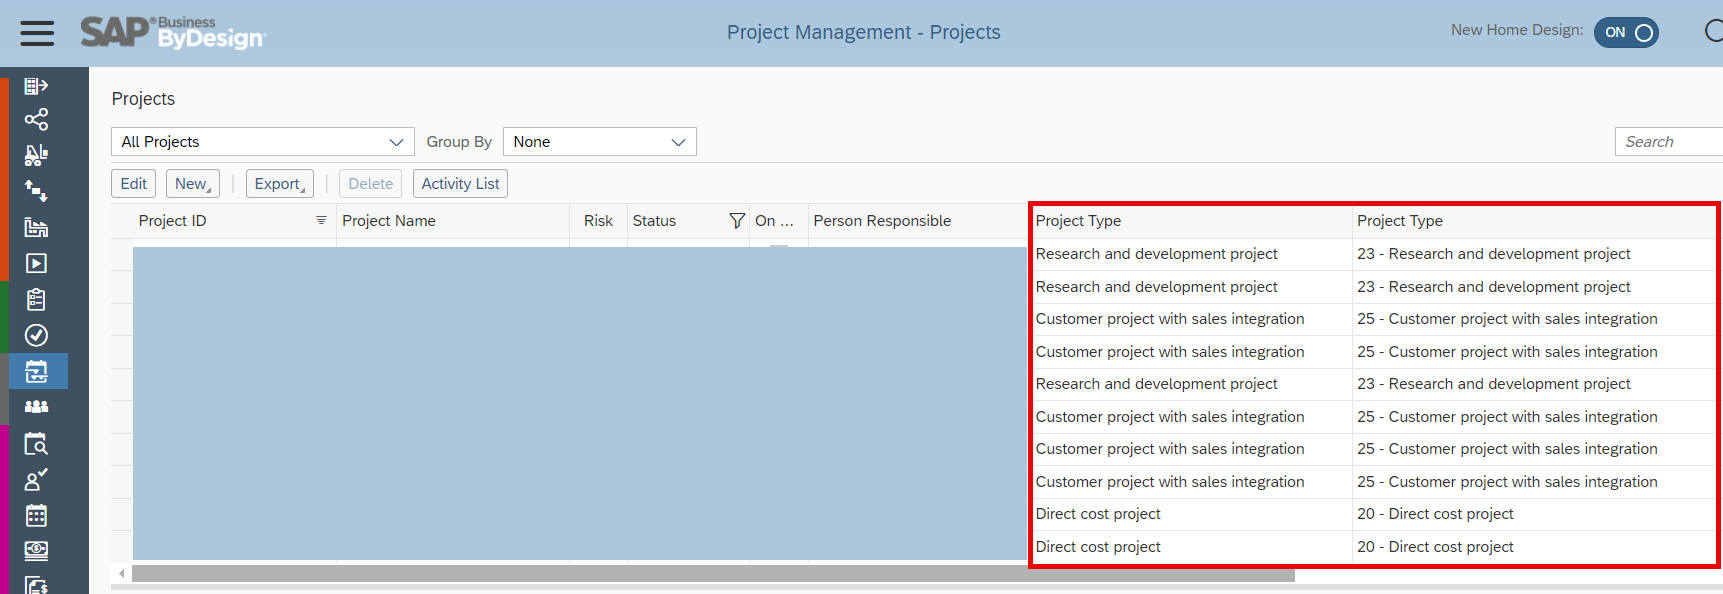 Project Type - Projects view.png